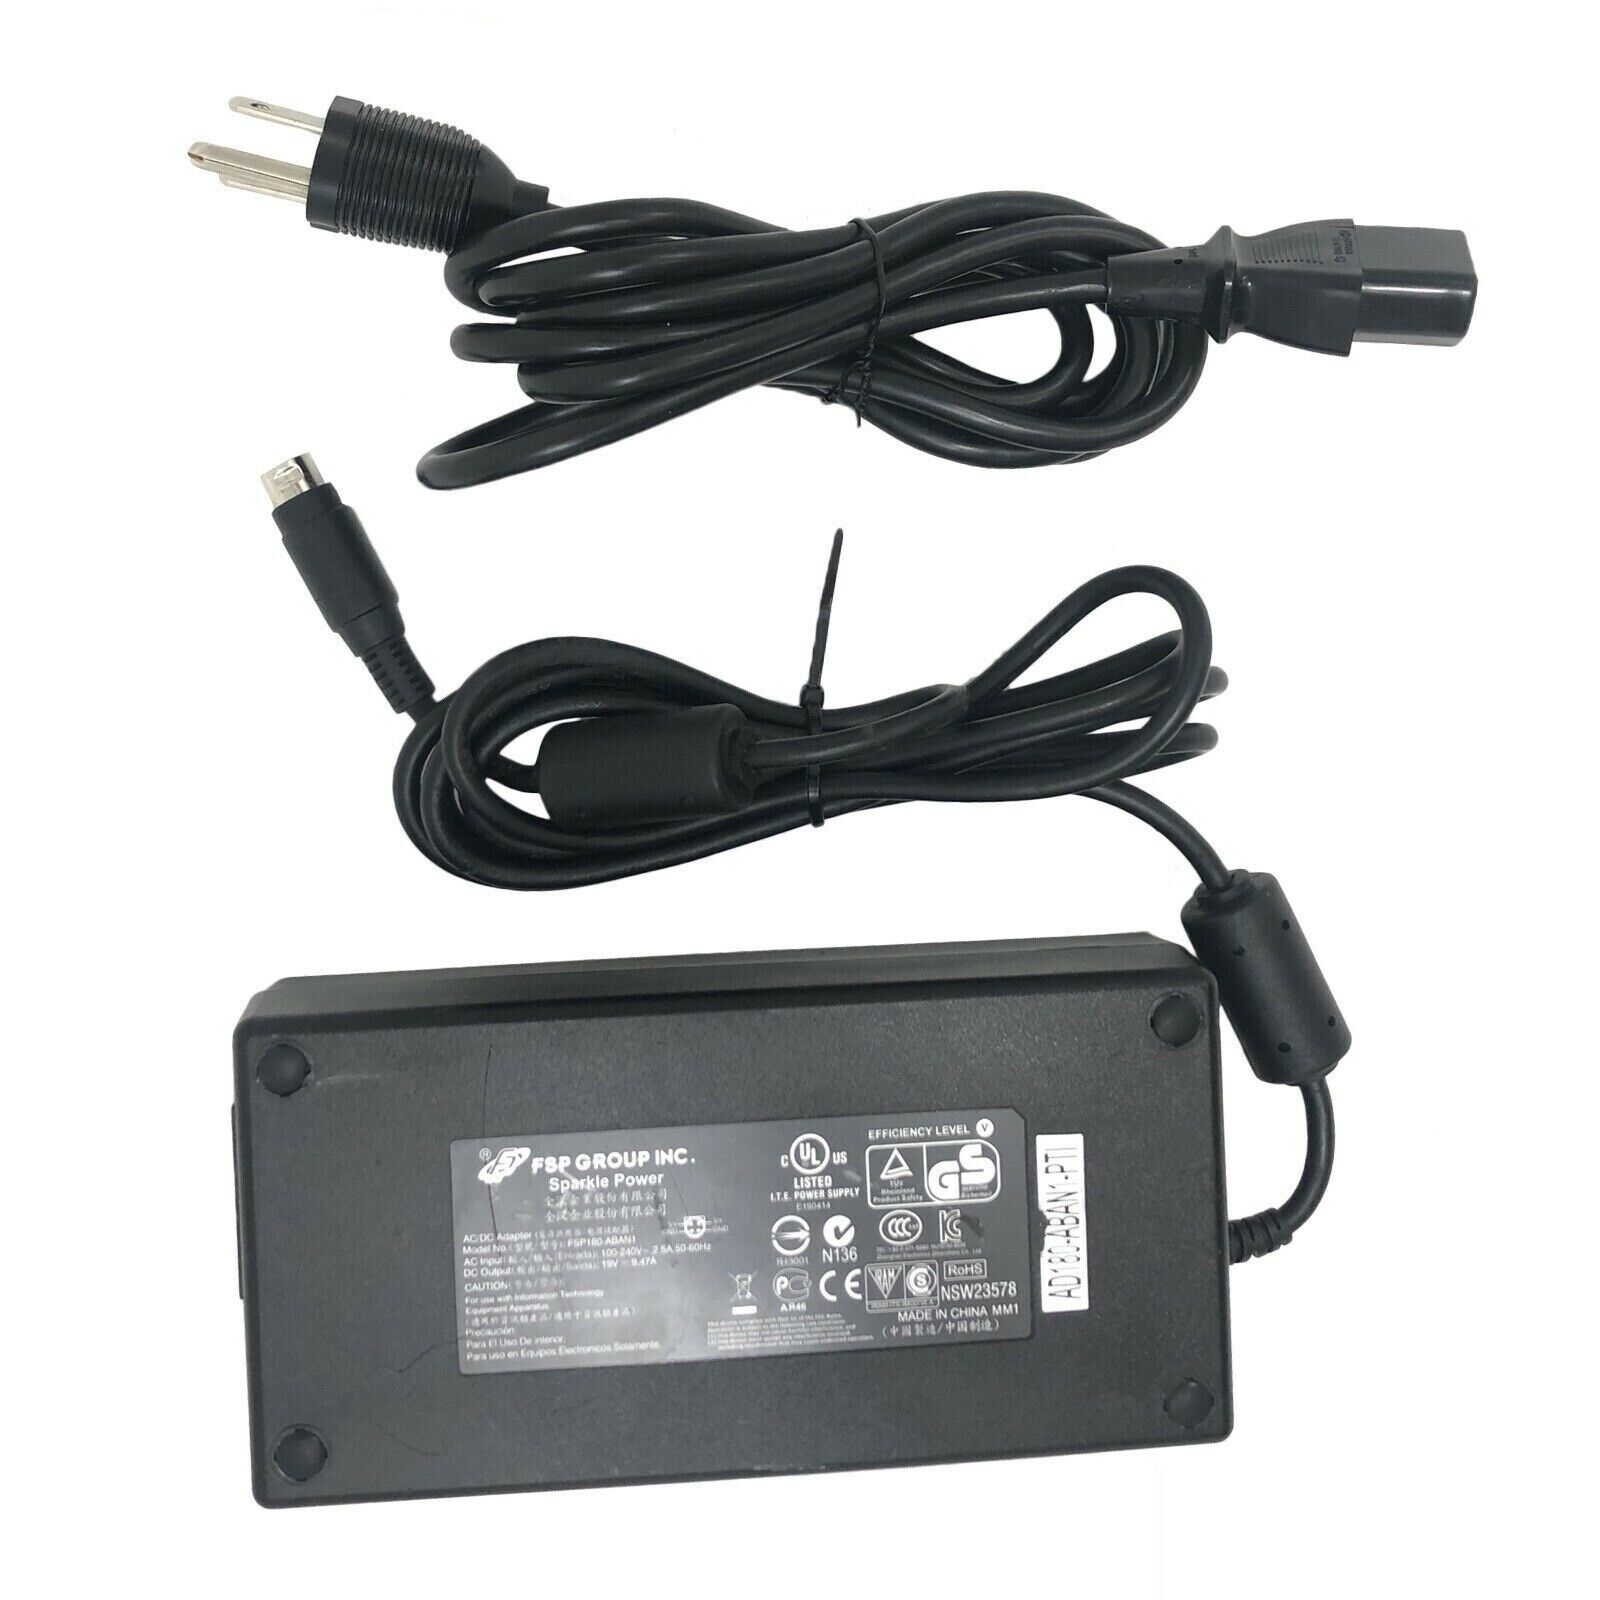 *Brand NEW*Genuine FSP 19V 9.47A 180W AC Adapter 4 Pin 9NA1800700 FSP180-ABAN1 Power Supply